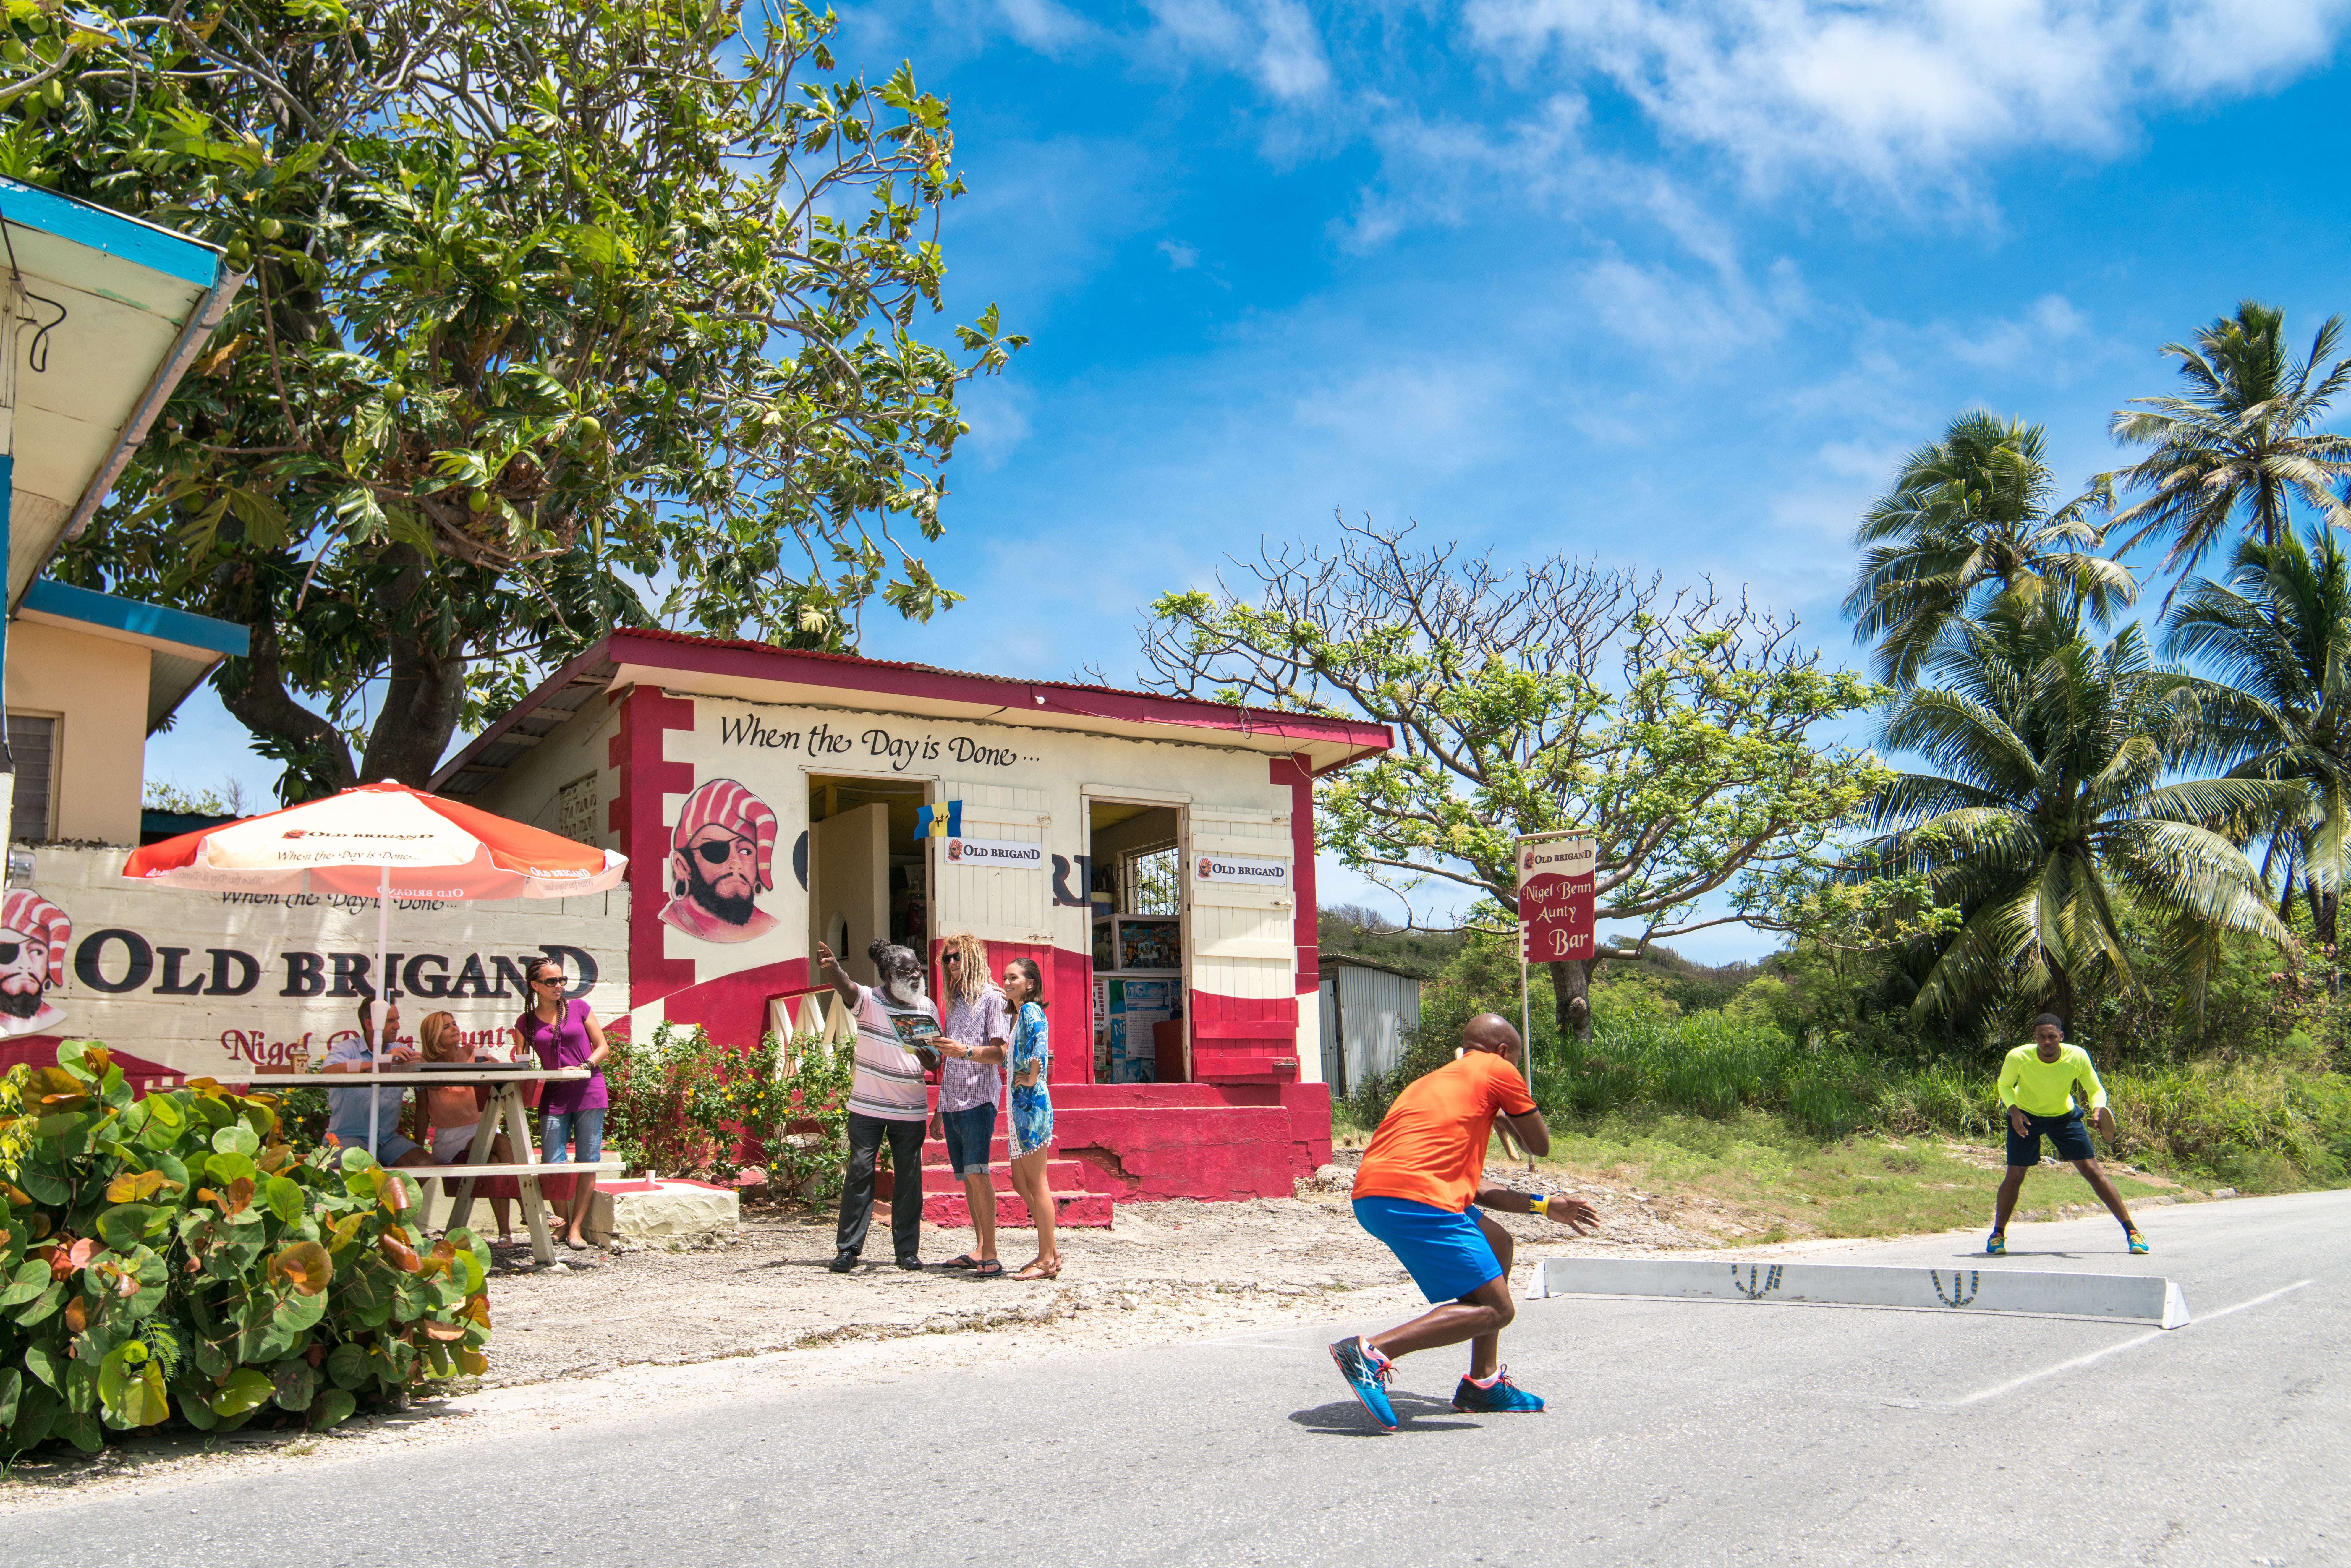 Enjoy a rum punch at one of the island’s friendly rum shops